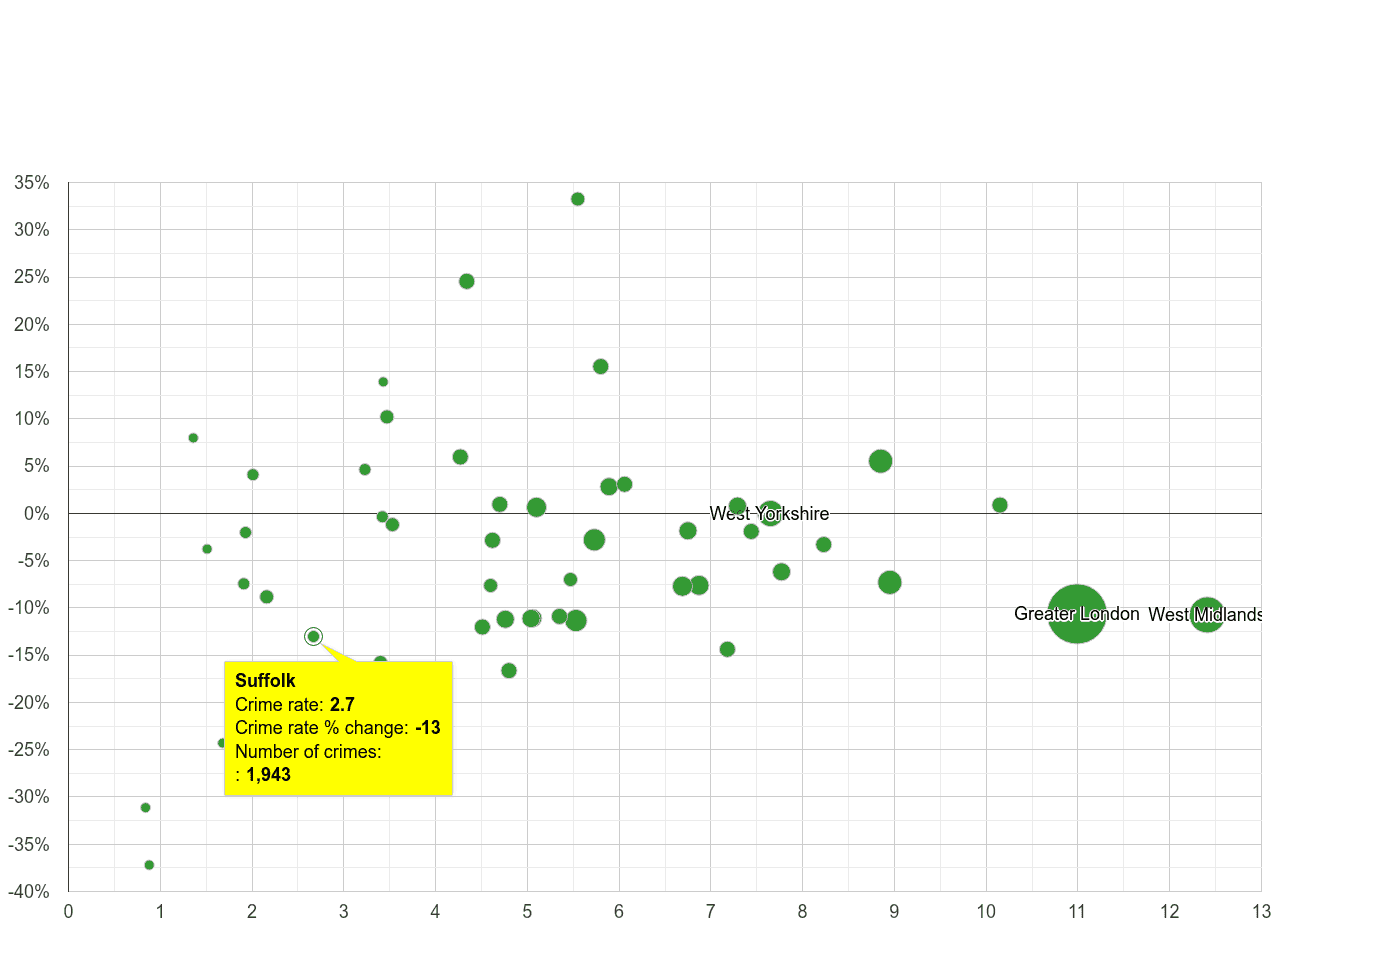 Suffolk vehicle crime rate compared to other counties